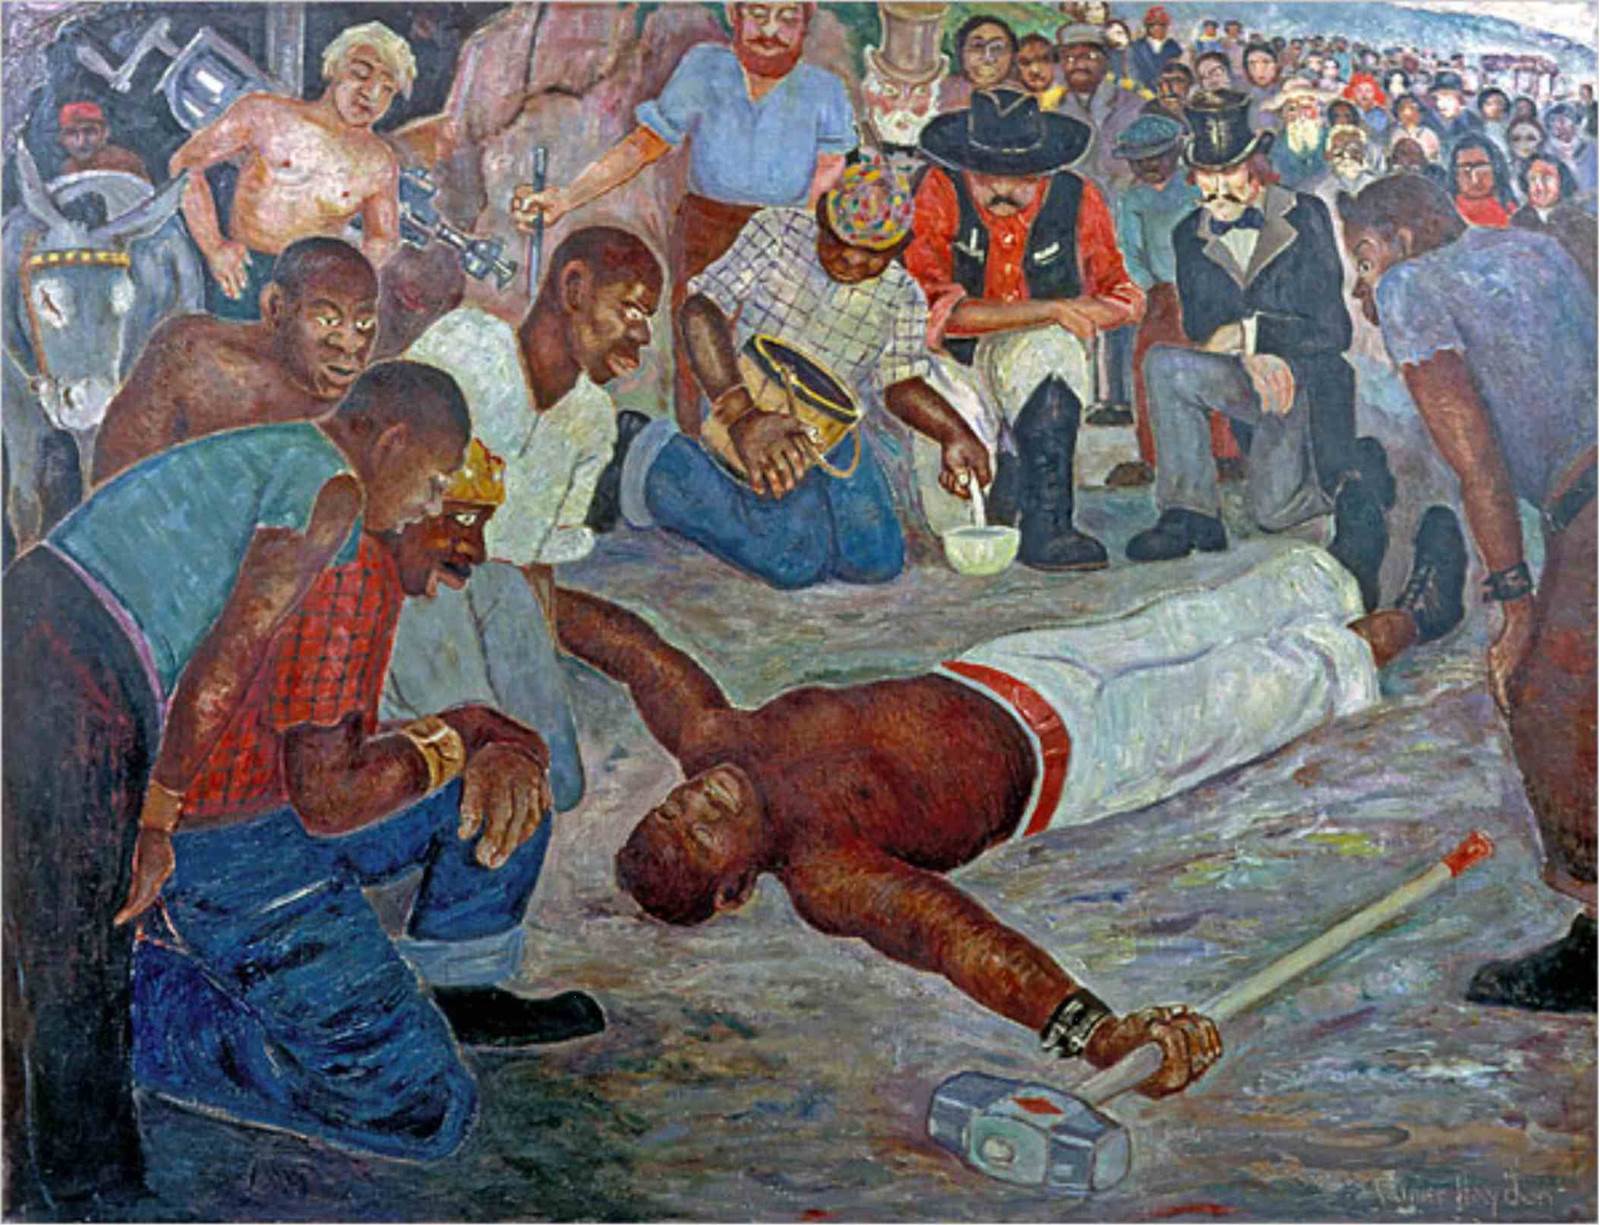 An image of one of the John Henry series paintings by Palmer Hayden. A large crowd of people (predominantly Black and white male-presenting people) circle around a man representing John Henry lying dead after beating a steam drill in a labor contest. John holds a hammer in his right hand and wears a pair of lightly colored pants, black shoes, and a red belt.